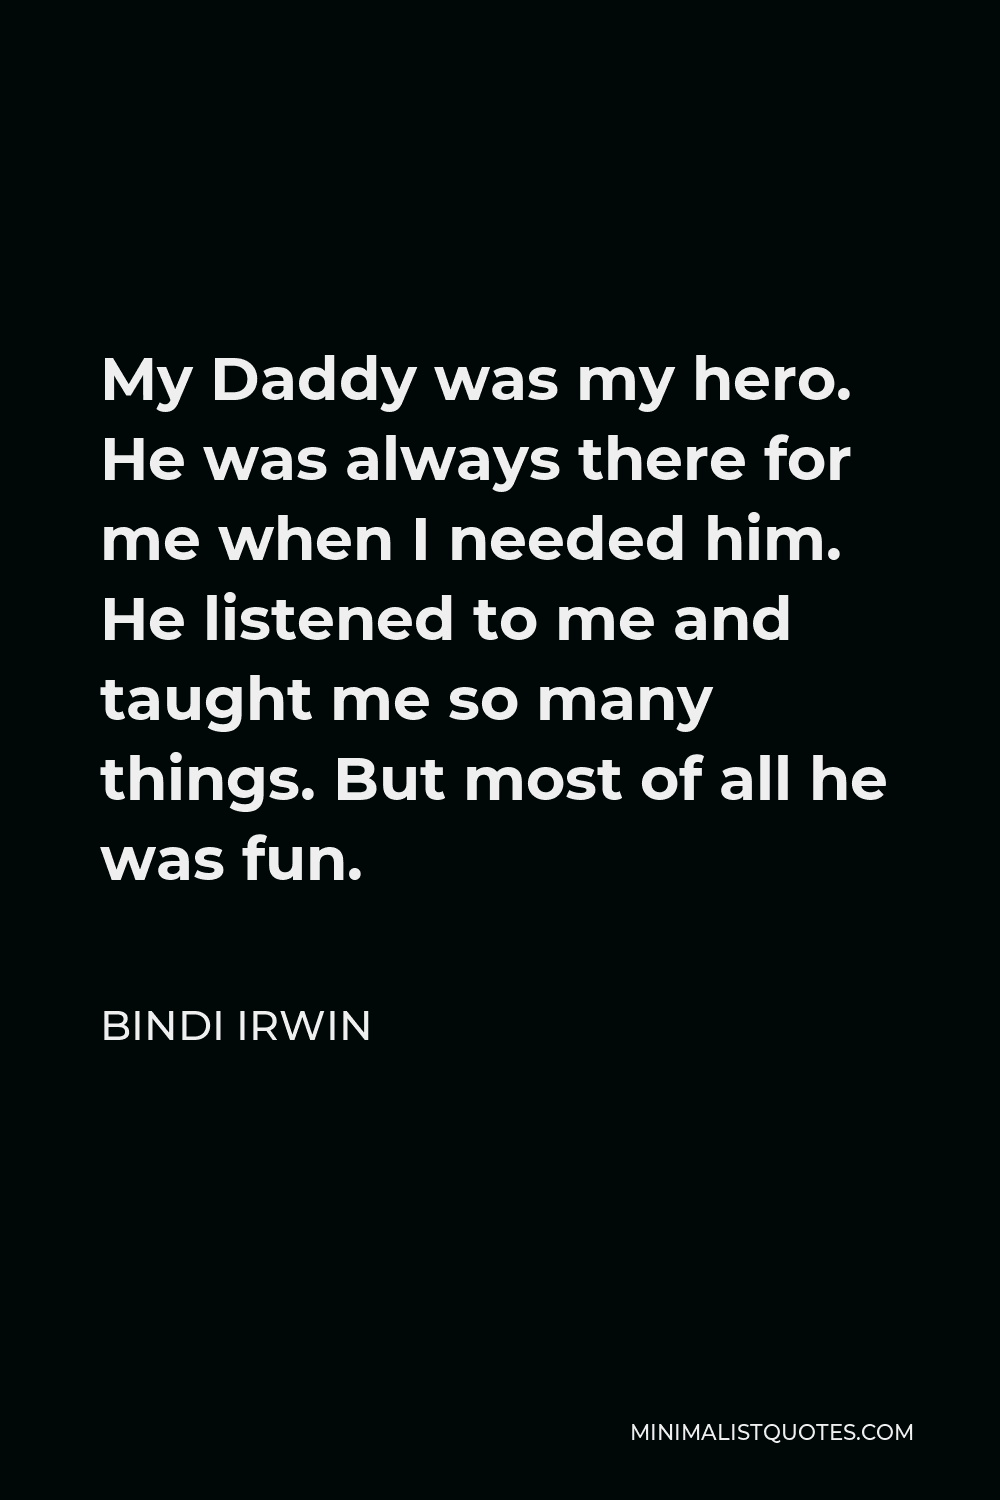 Bindi Irwin Quote - My Daddy was my hero. He was always there for me when I needed him. He listened to me and taught me so many things. But most of all he was fun.